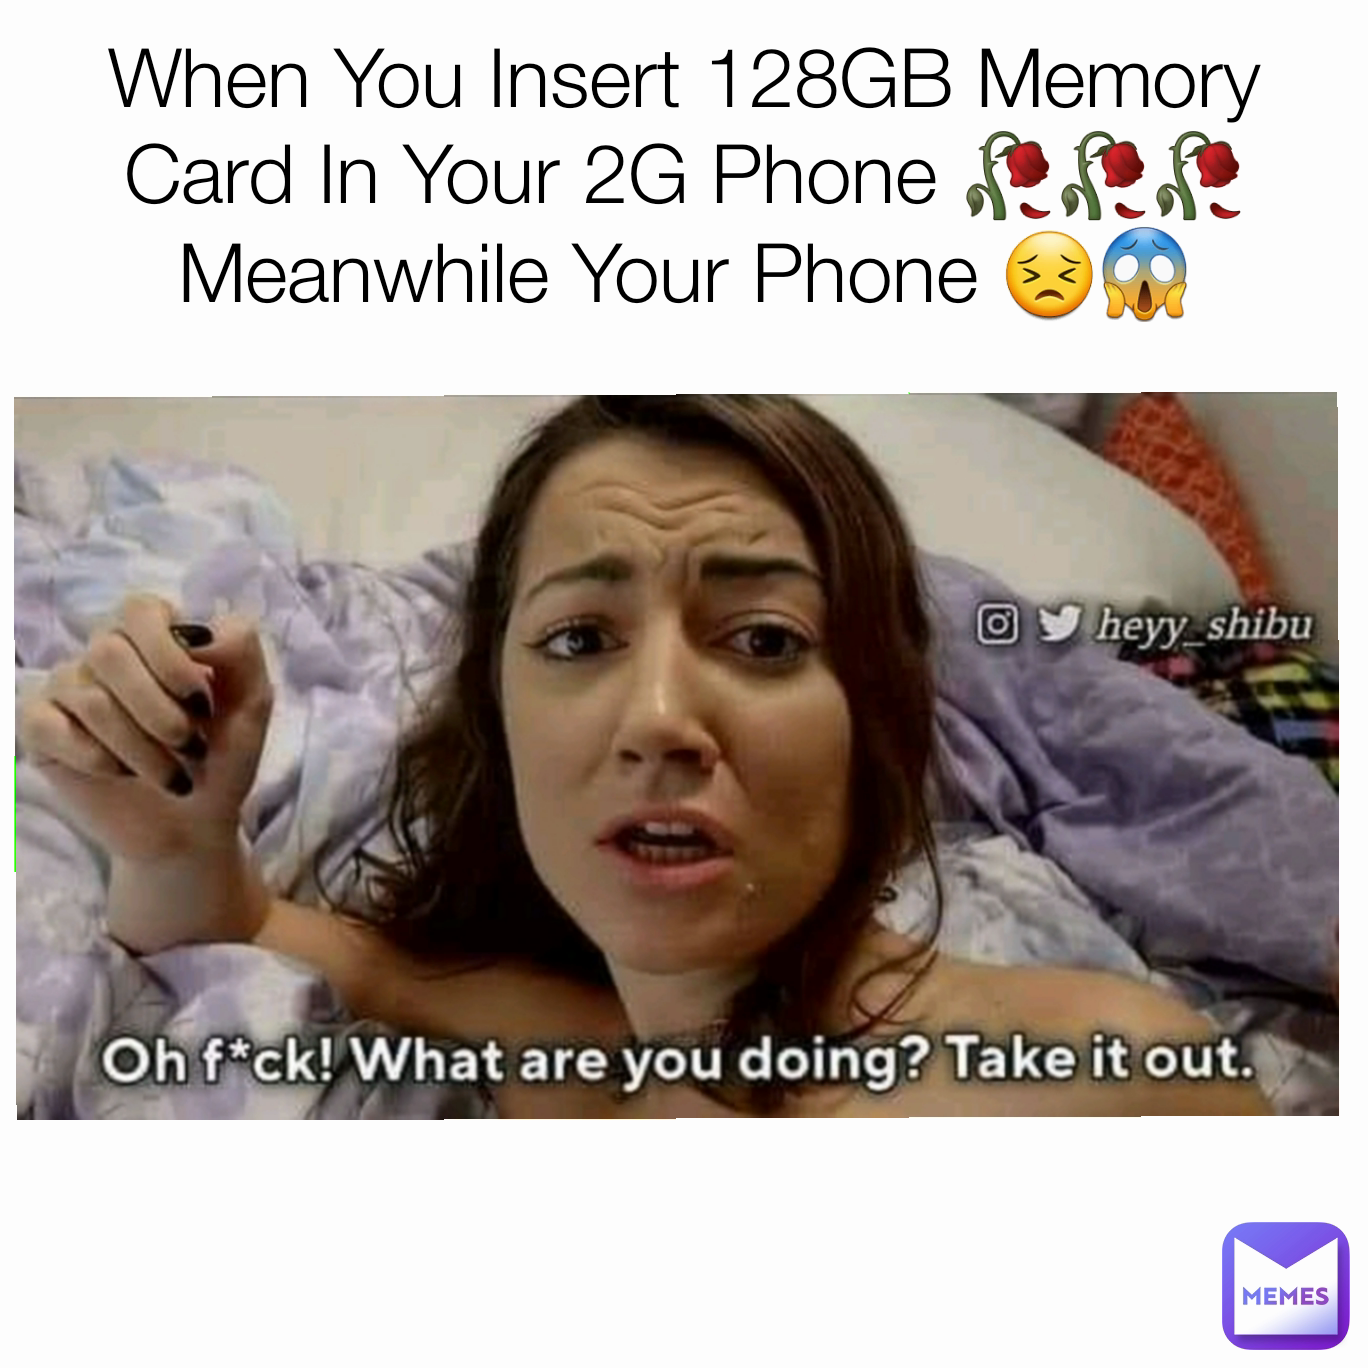 When You Insert 128GB Memory Card In Your 2G Phone 🥀🥀🥀
Meanwhile Your Phone 😣😱